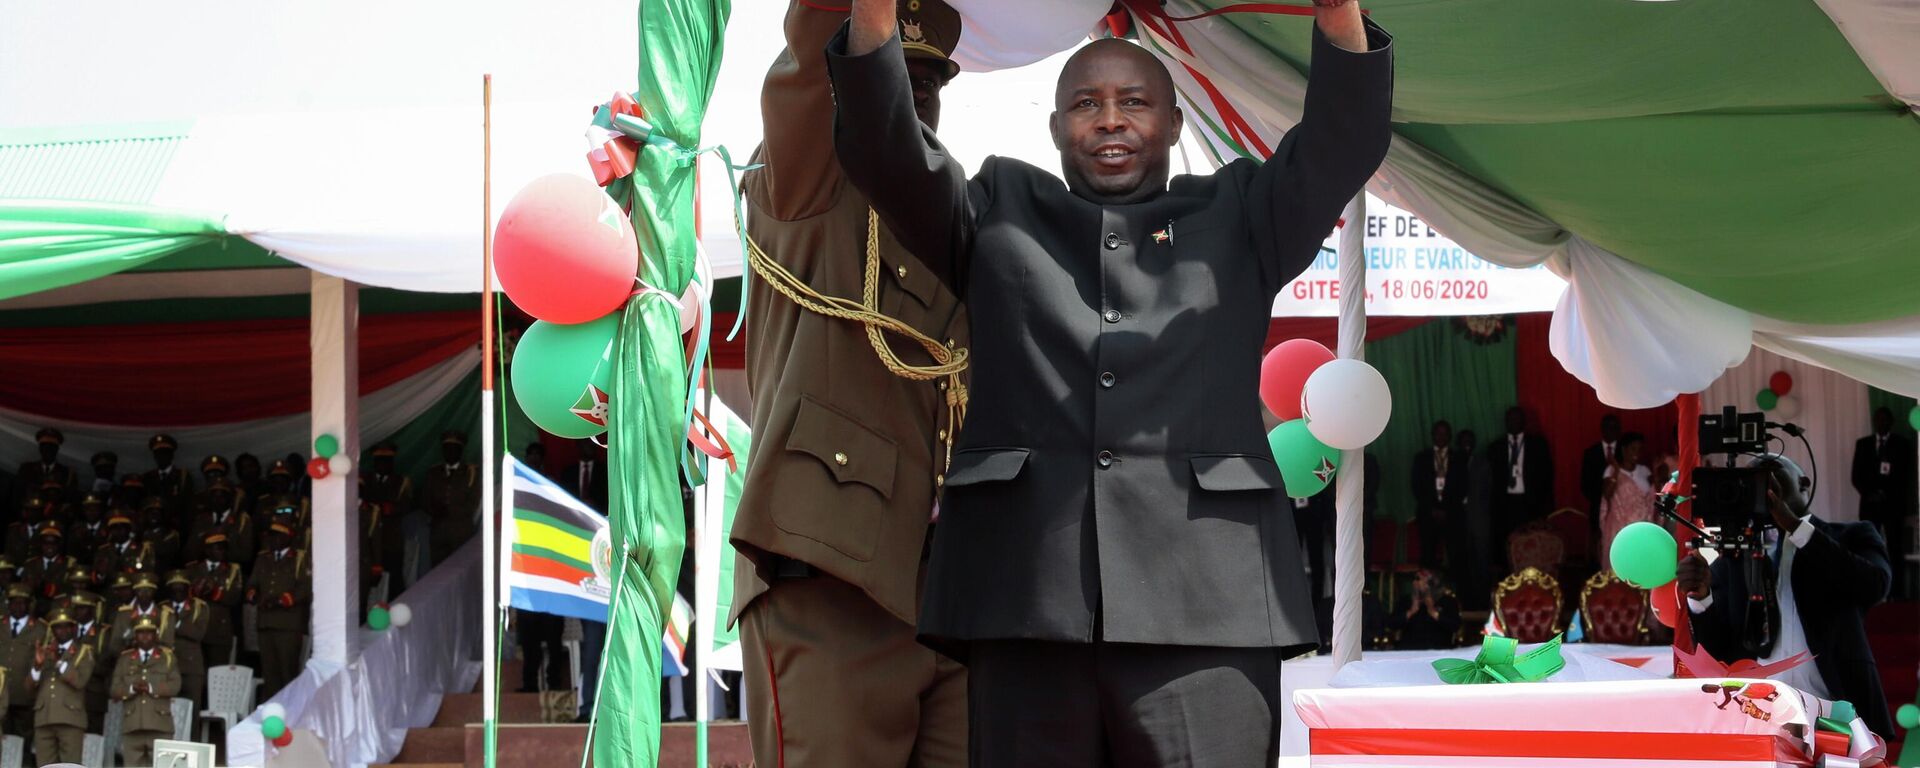 FILE - Burundi's President Evariste Ndayishimiye gestures to the crowd after his inauguration in Gitega, Burundi on June 18, 2020. Opposition leaders and human rights groups warned in Dec. 2021 that Burundi's government has shown little if any improvement under Ndayishimiye, who took office after the death of President Pierre Nkurunziza in 2020 with talk of reforms after years of deadly political crackdowns. - Sputnik International, 1920, 08.09.2022